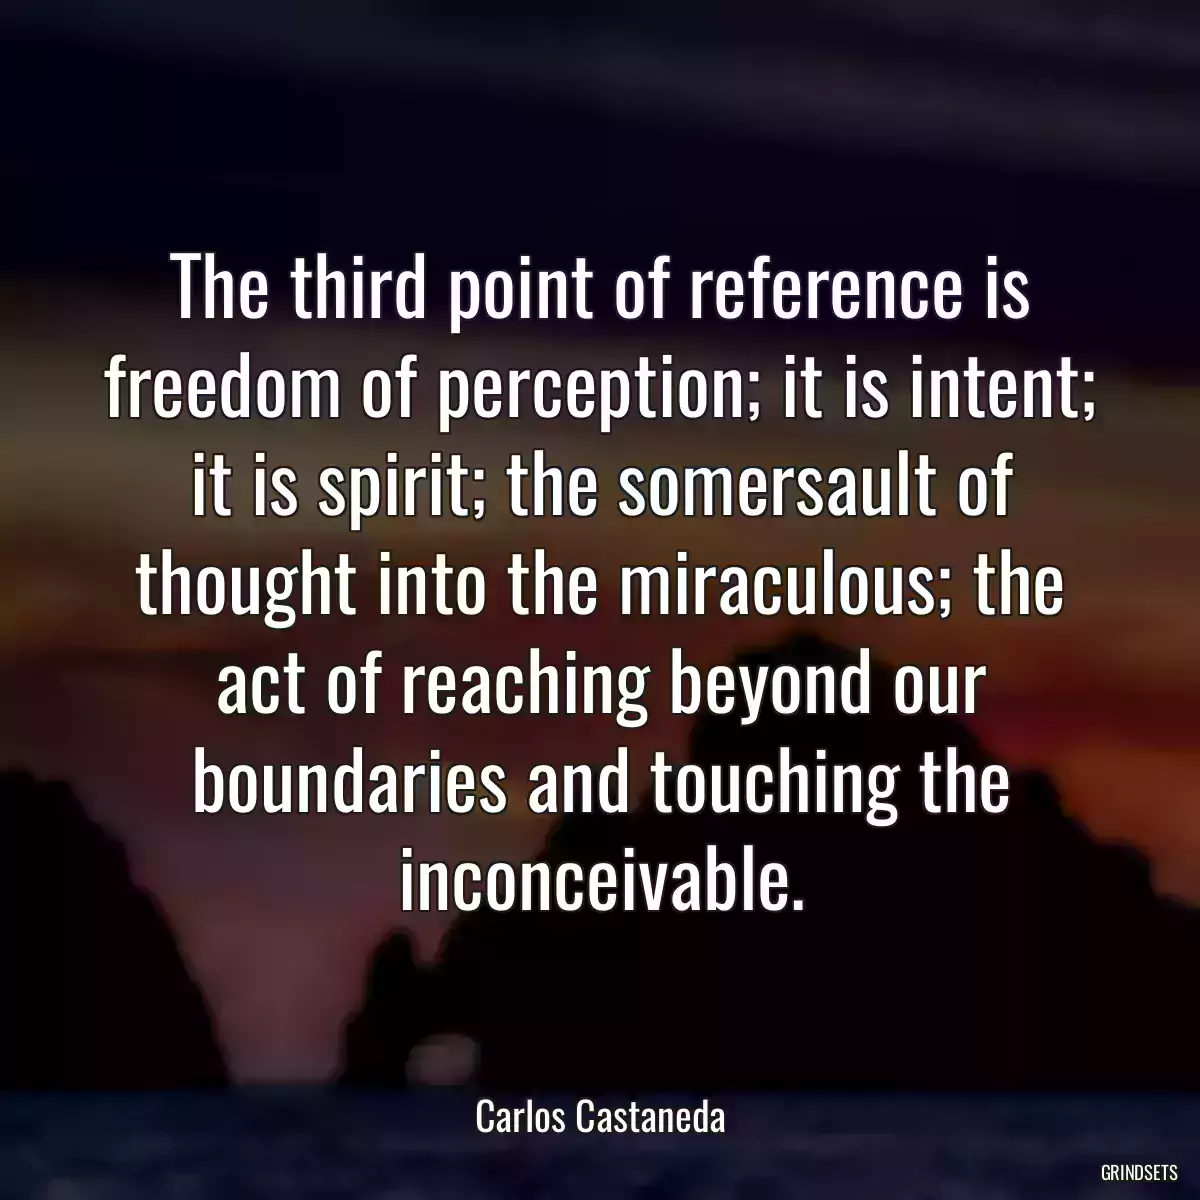 The third point of reference is freedom of perception; it is intent; it is spirit; the somersault of thought into the miraculous; the act of reaching beyond our boundaries and touching the inconceivable.